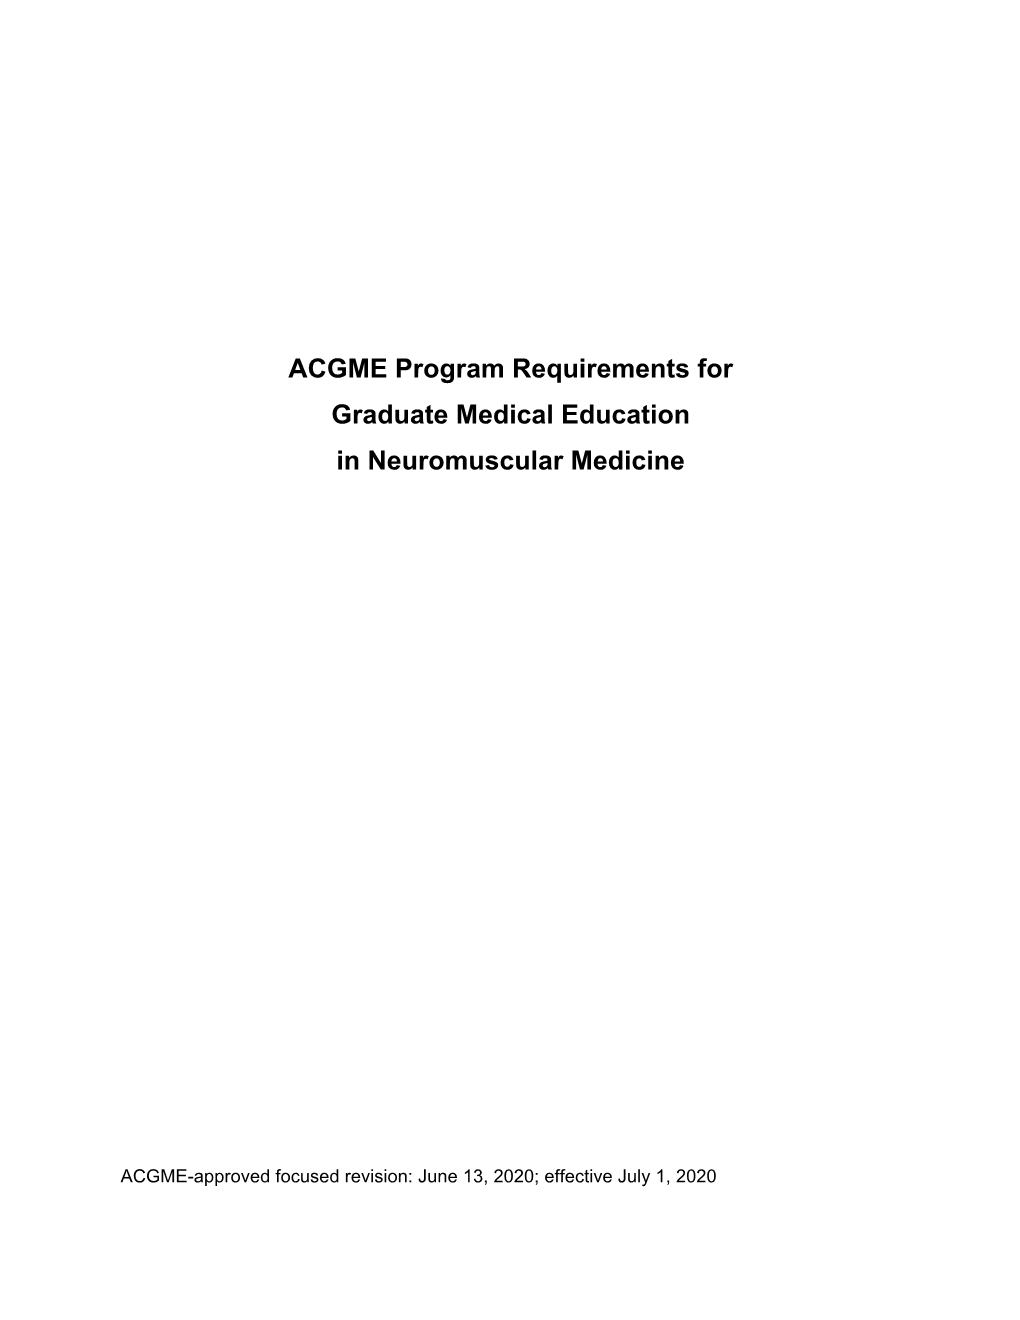 ACGME Program Requirements for Graduate Medical Education in Neuromuscular Medicine